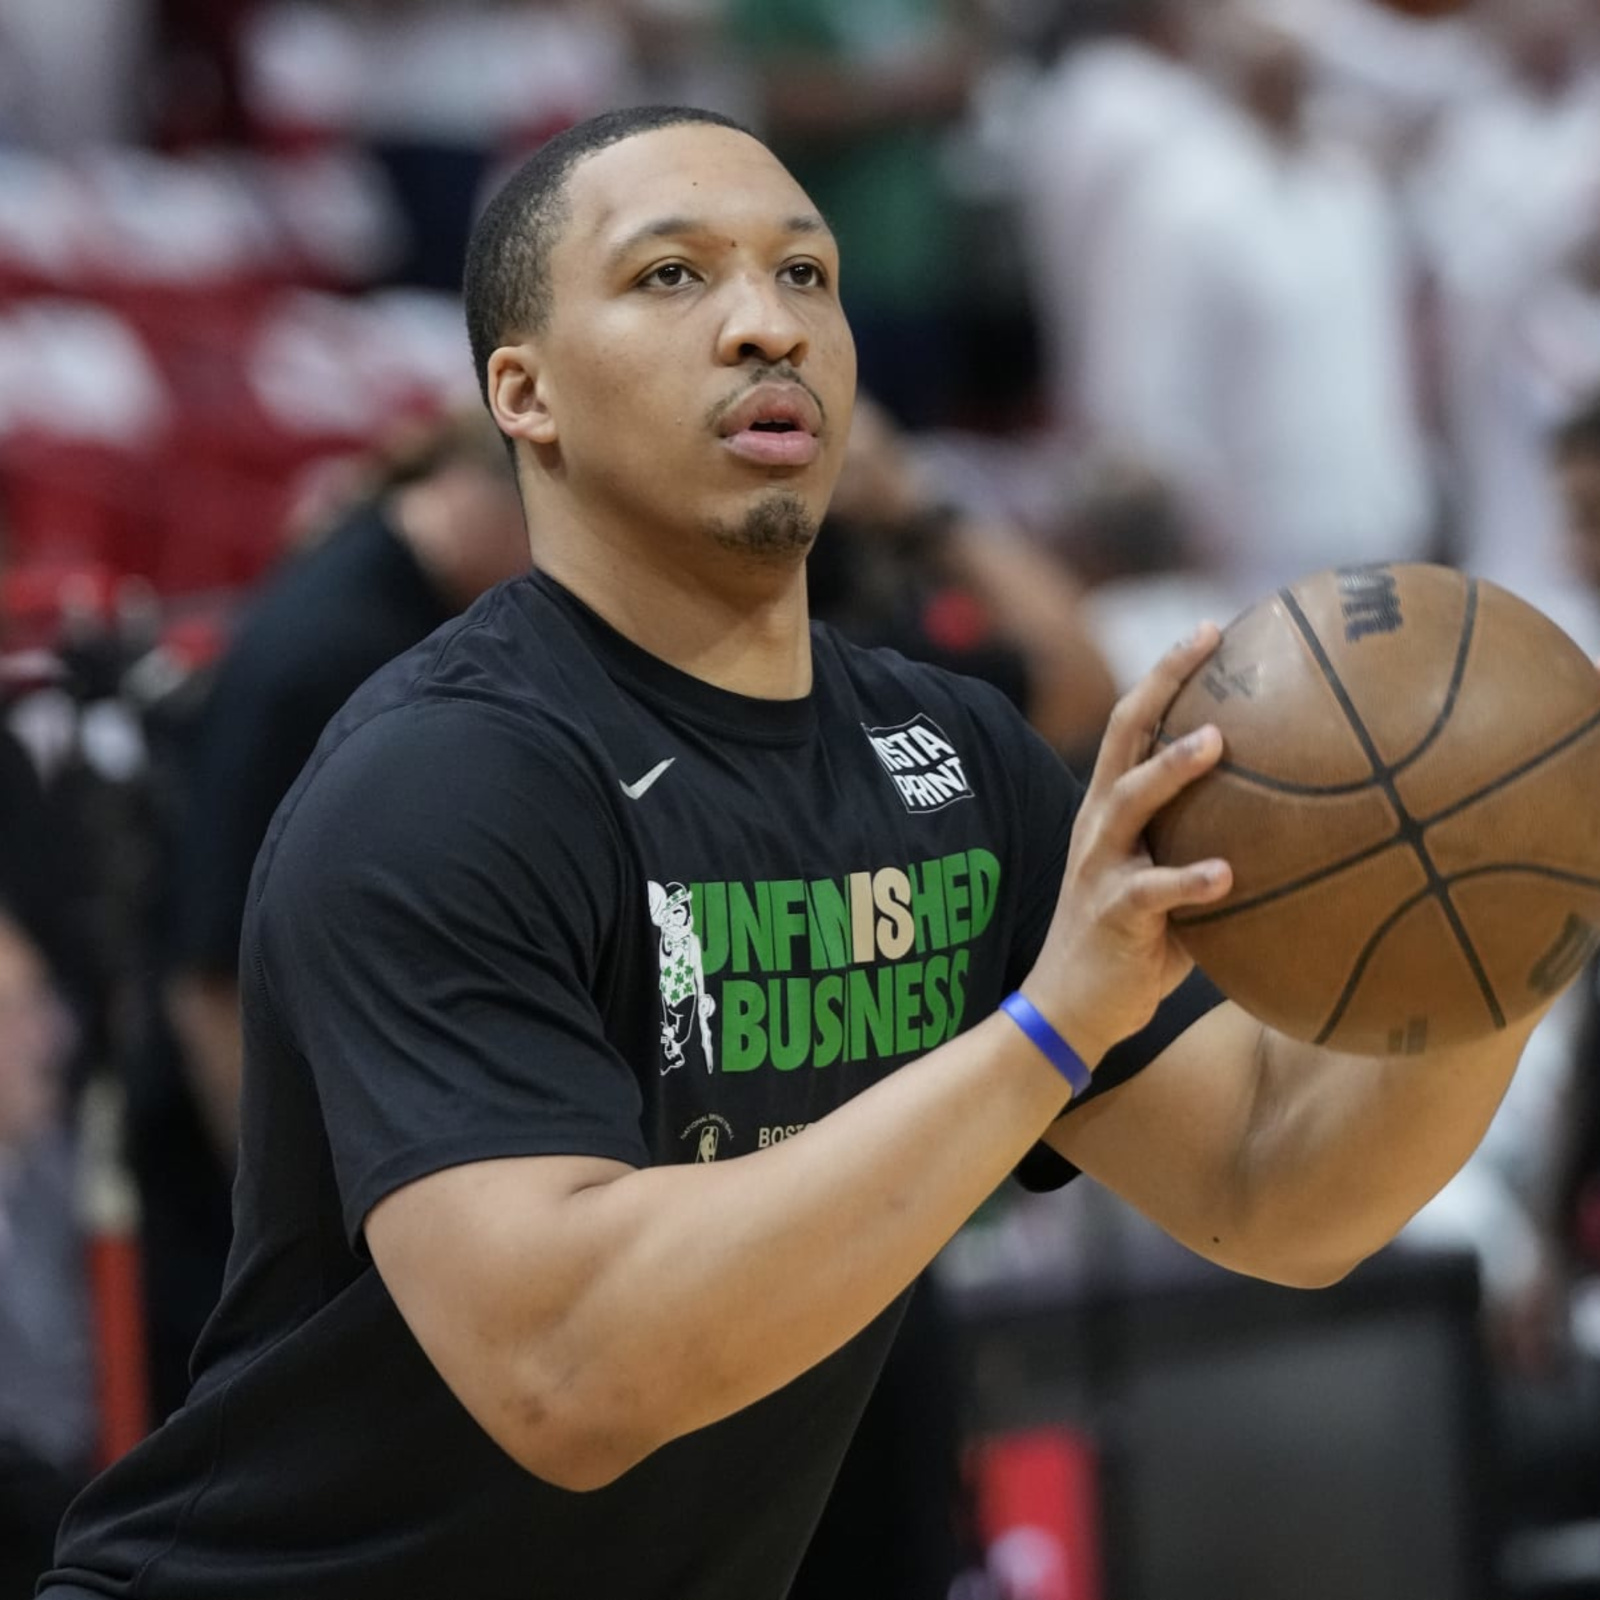 Mavericks finalizing trade for Grant Williams in 3-team deal with Celtics,  Spurs: Sources - The Athletic